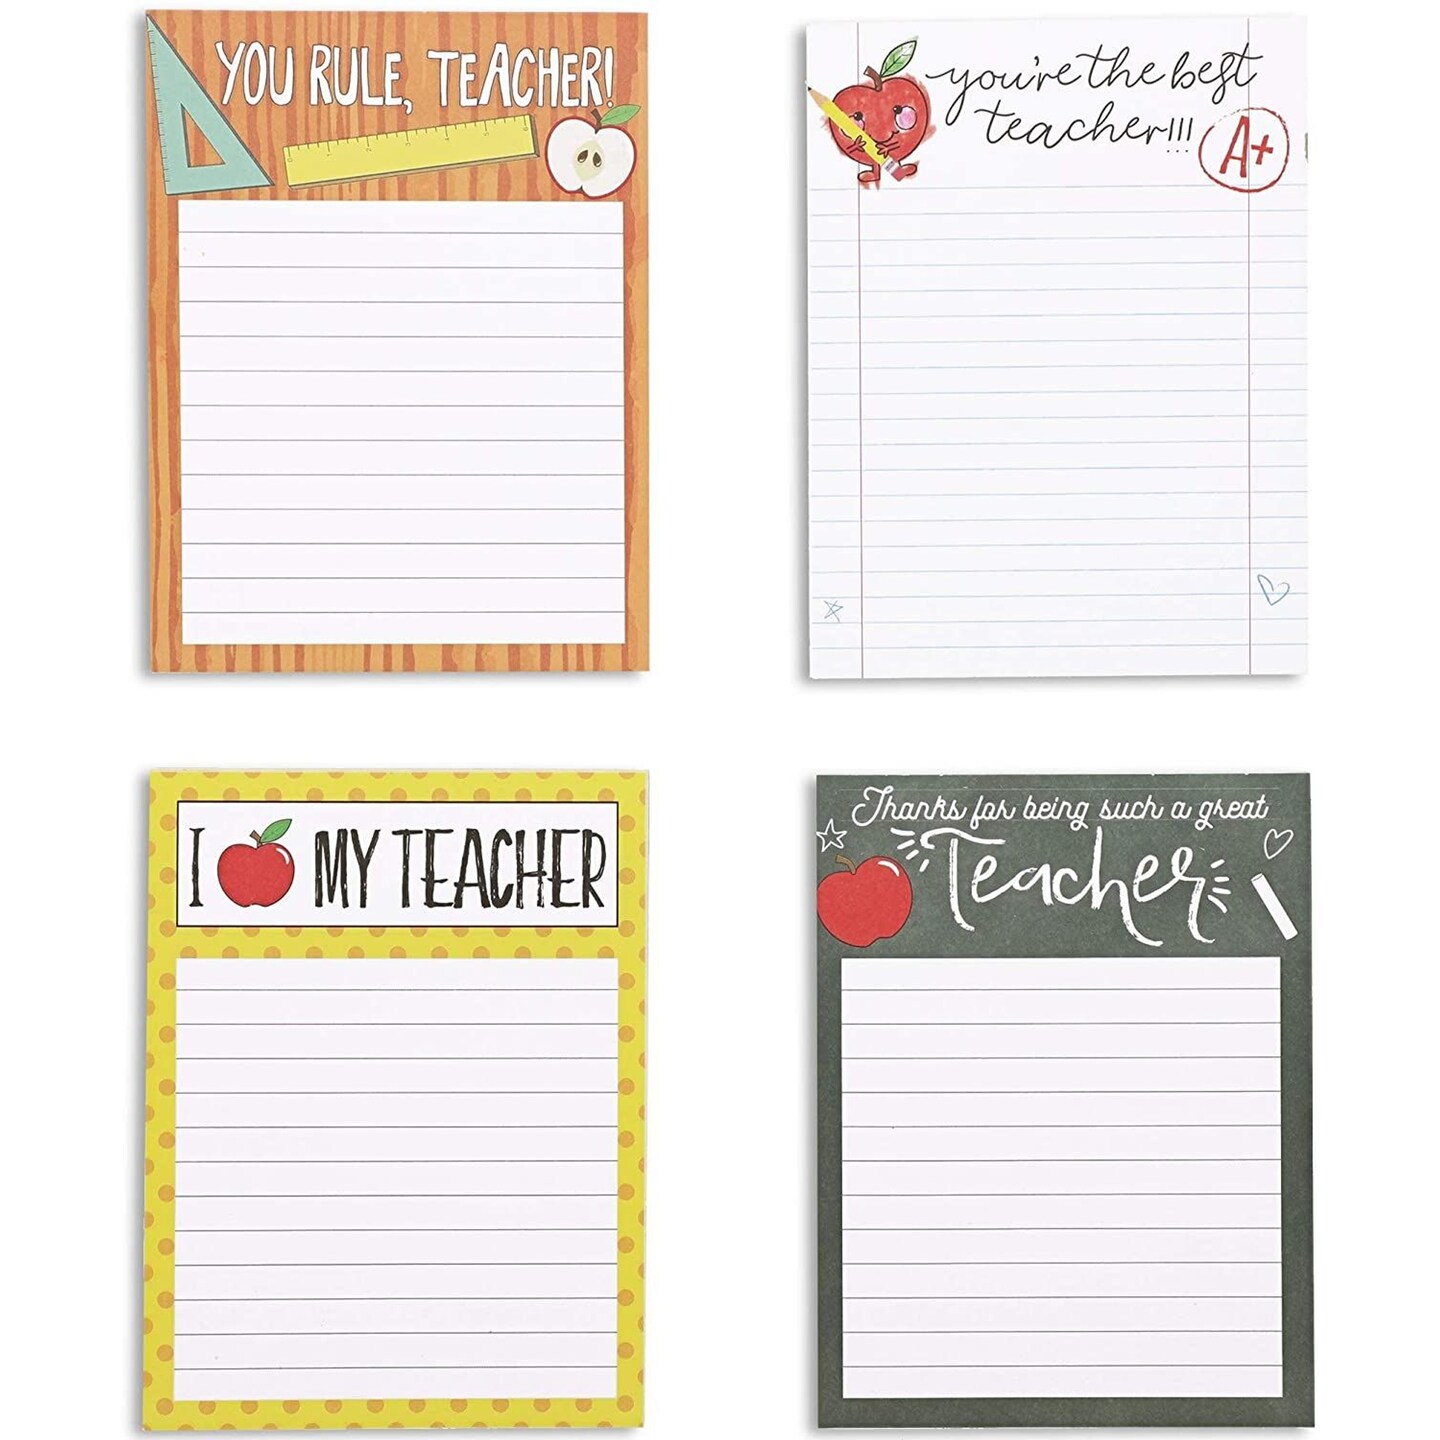 4 Pack Lined Notepads for Teacher Appreciation Gifts, School, Classroom Supplies, 4 Designs, 50 Sheets Each (4 x 5 In)